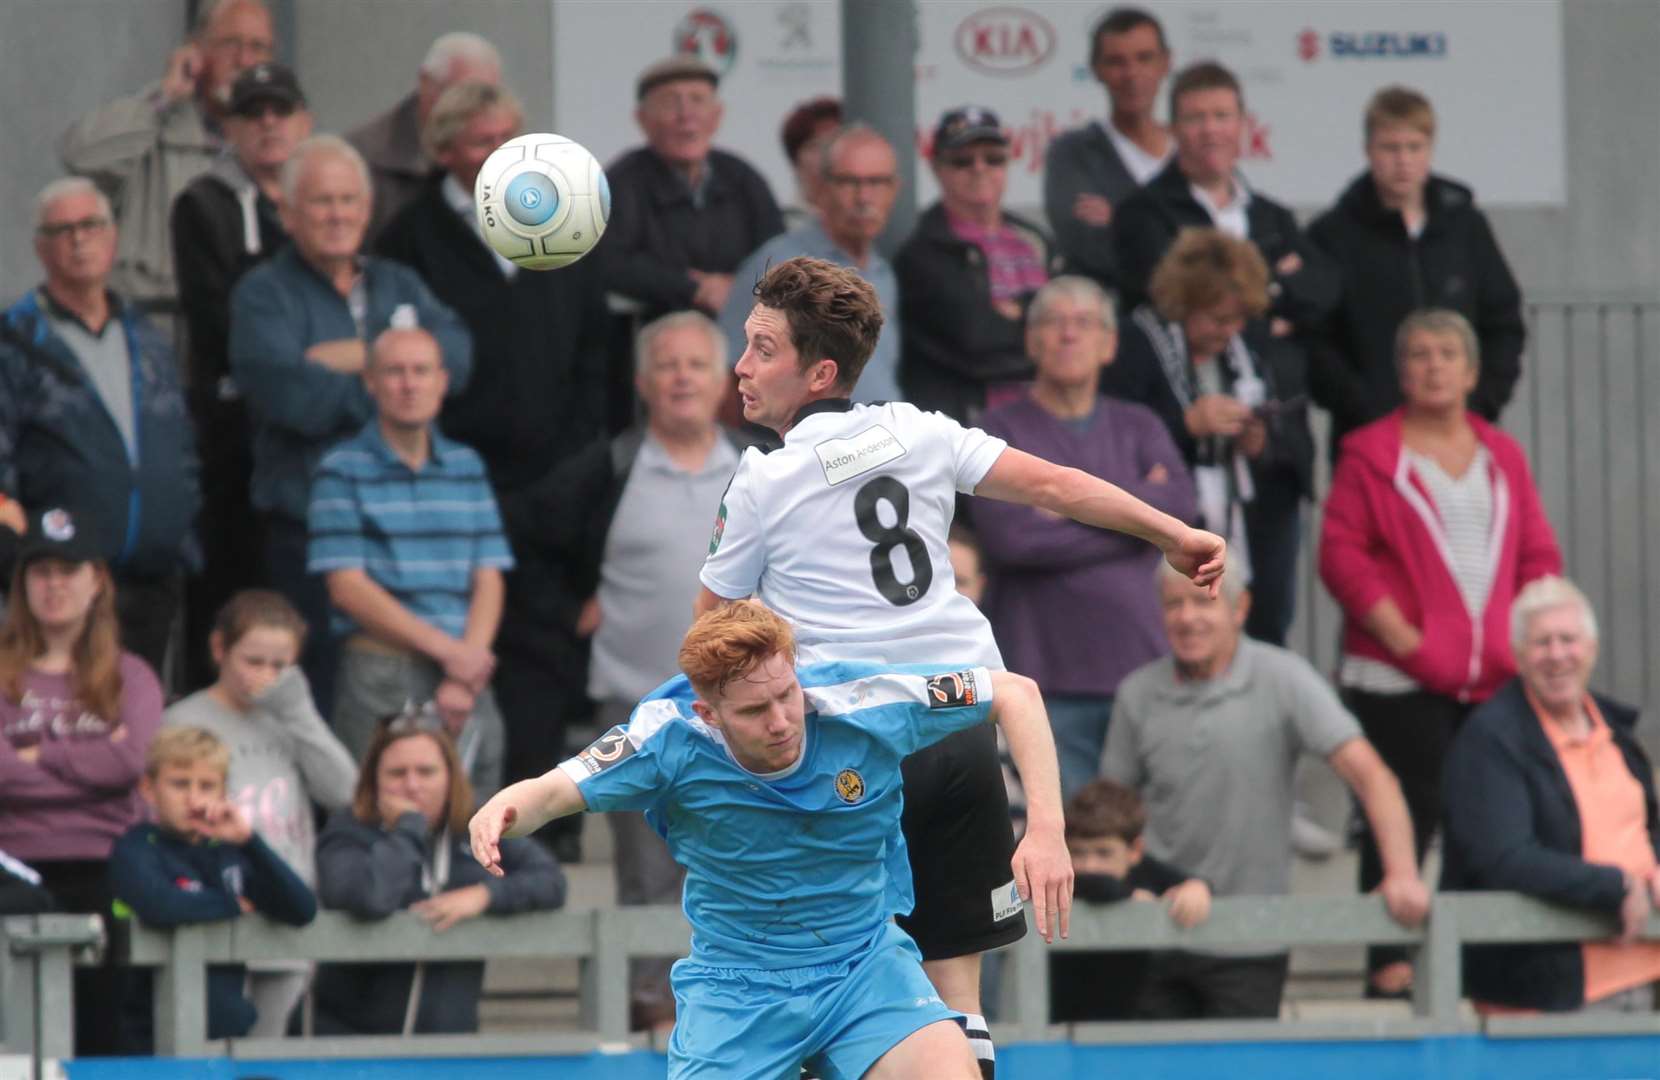 Lee Noble wins the ball in the air on his return to the Dartford side against East Thurrock on Monday. Picture: John Westhrop